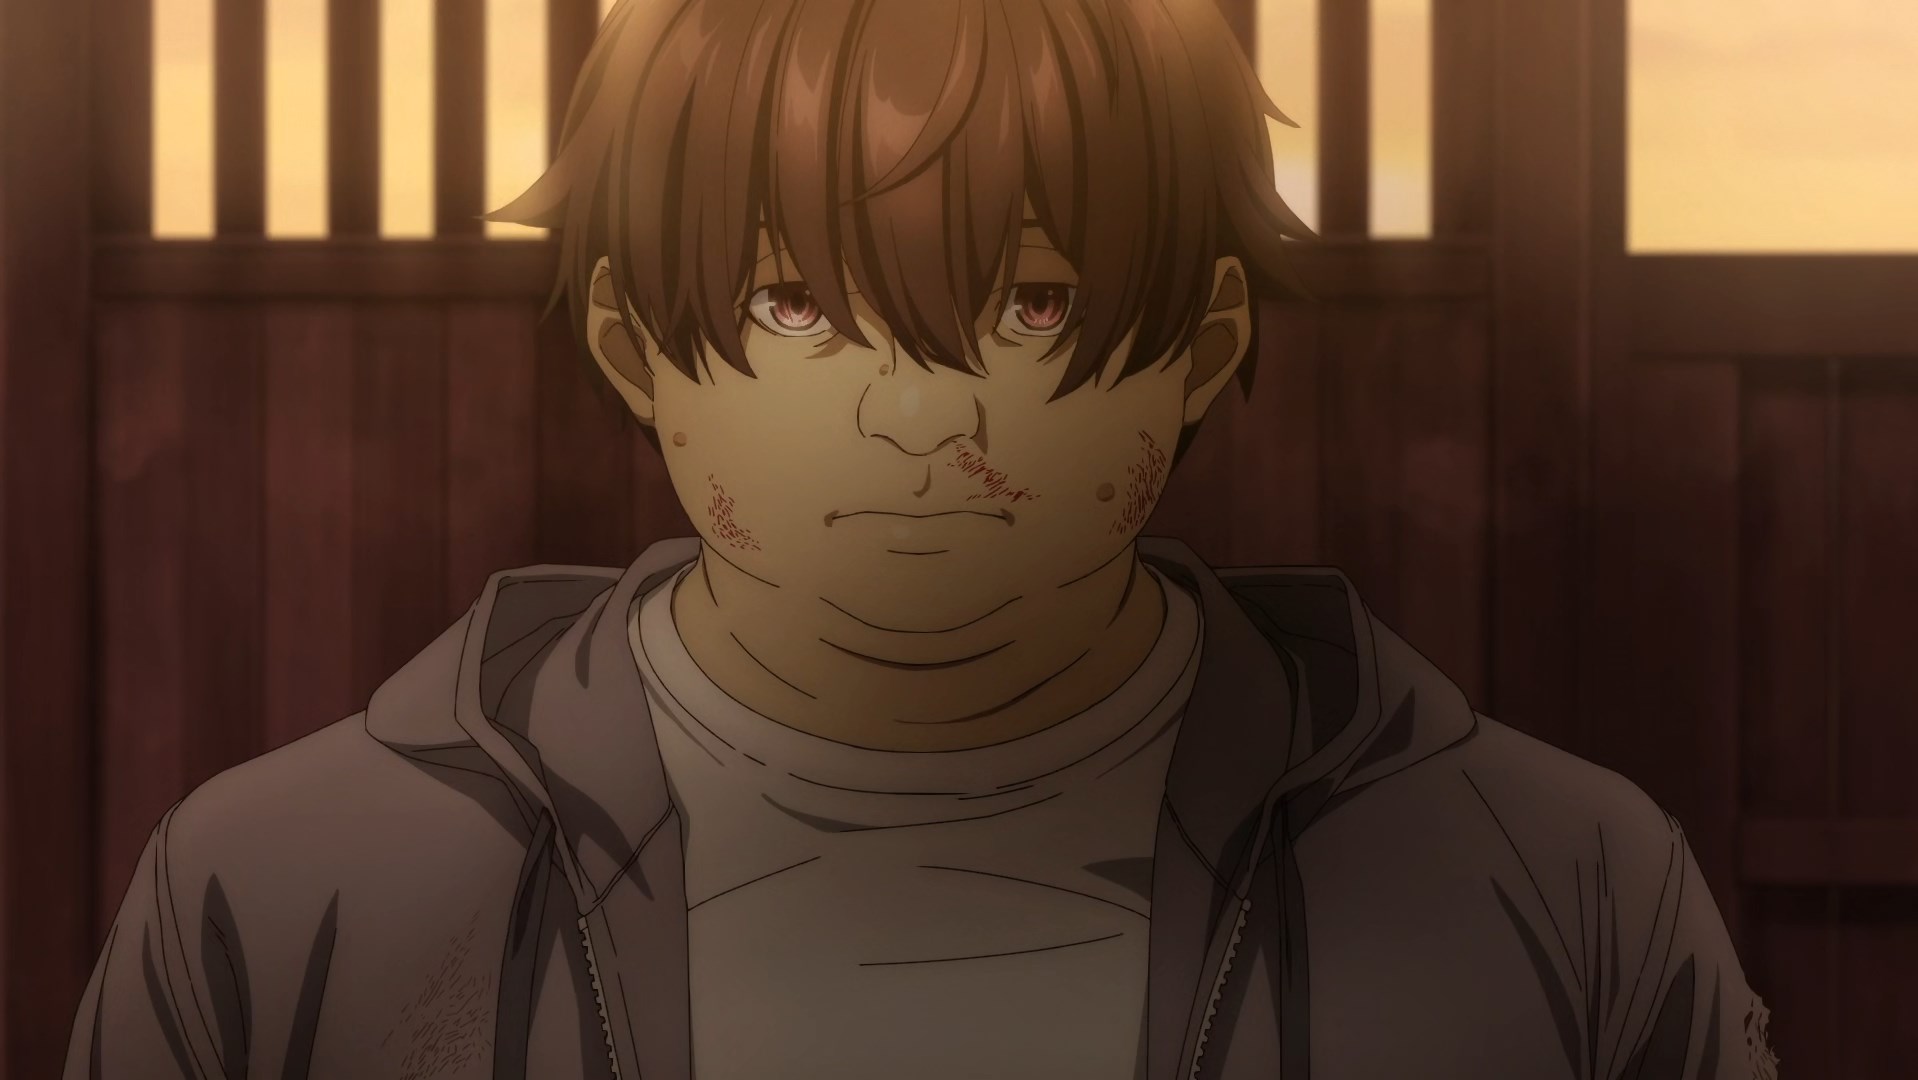 The protagonist as he was: fat, short, bleeding from being beat up, depressed